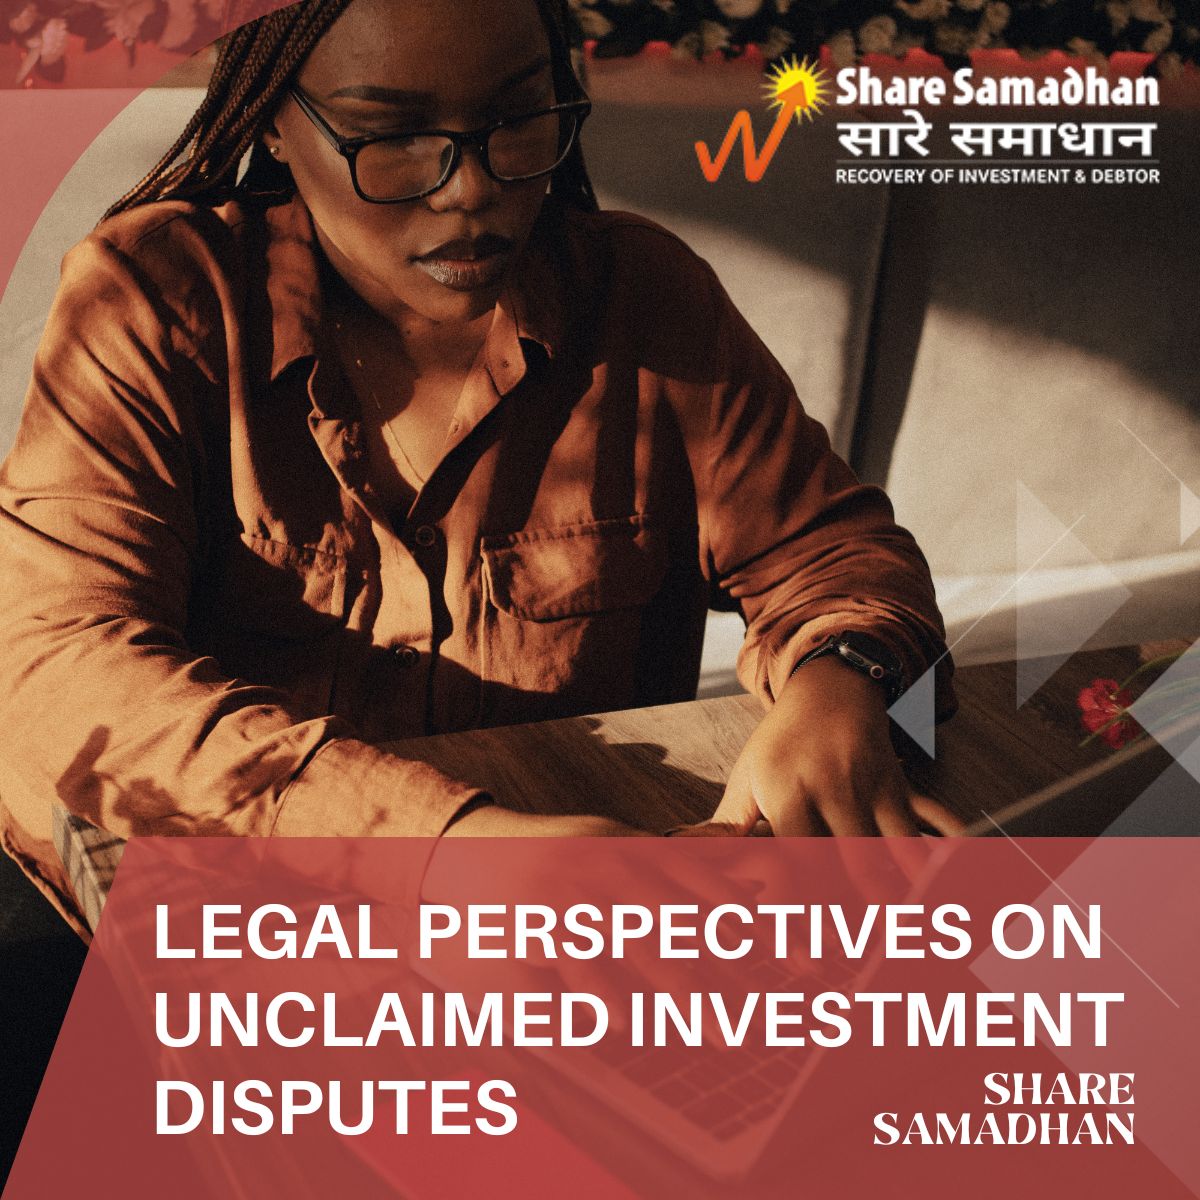 Legal Perspectives on Unclaimed Investment Disputes